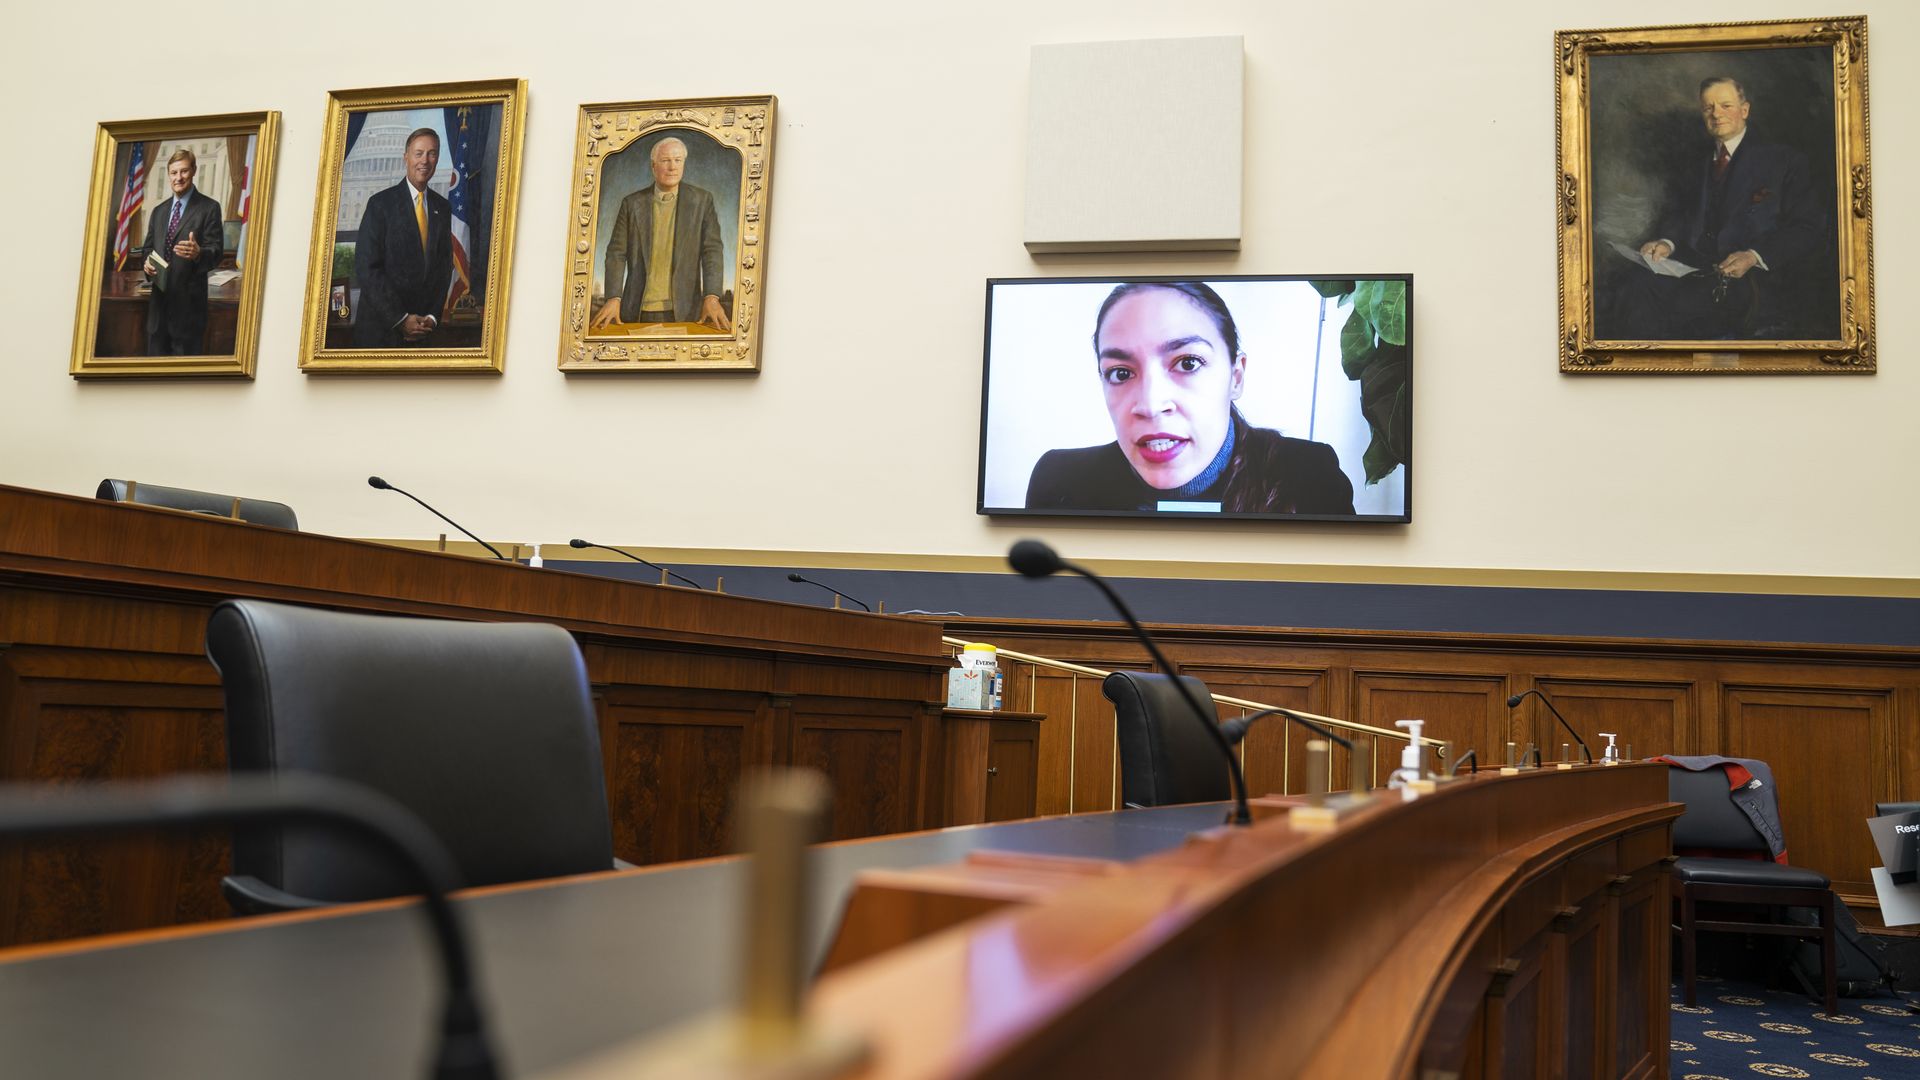 Rep. Alexandria Ocasio-Cortez is seen on a TV monitor as she beams into a congressional hearing.